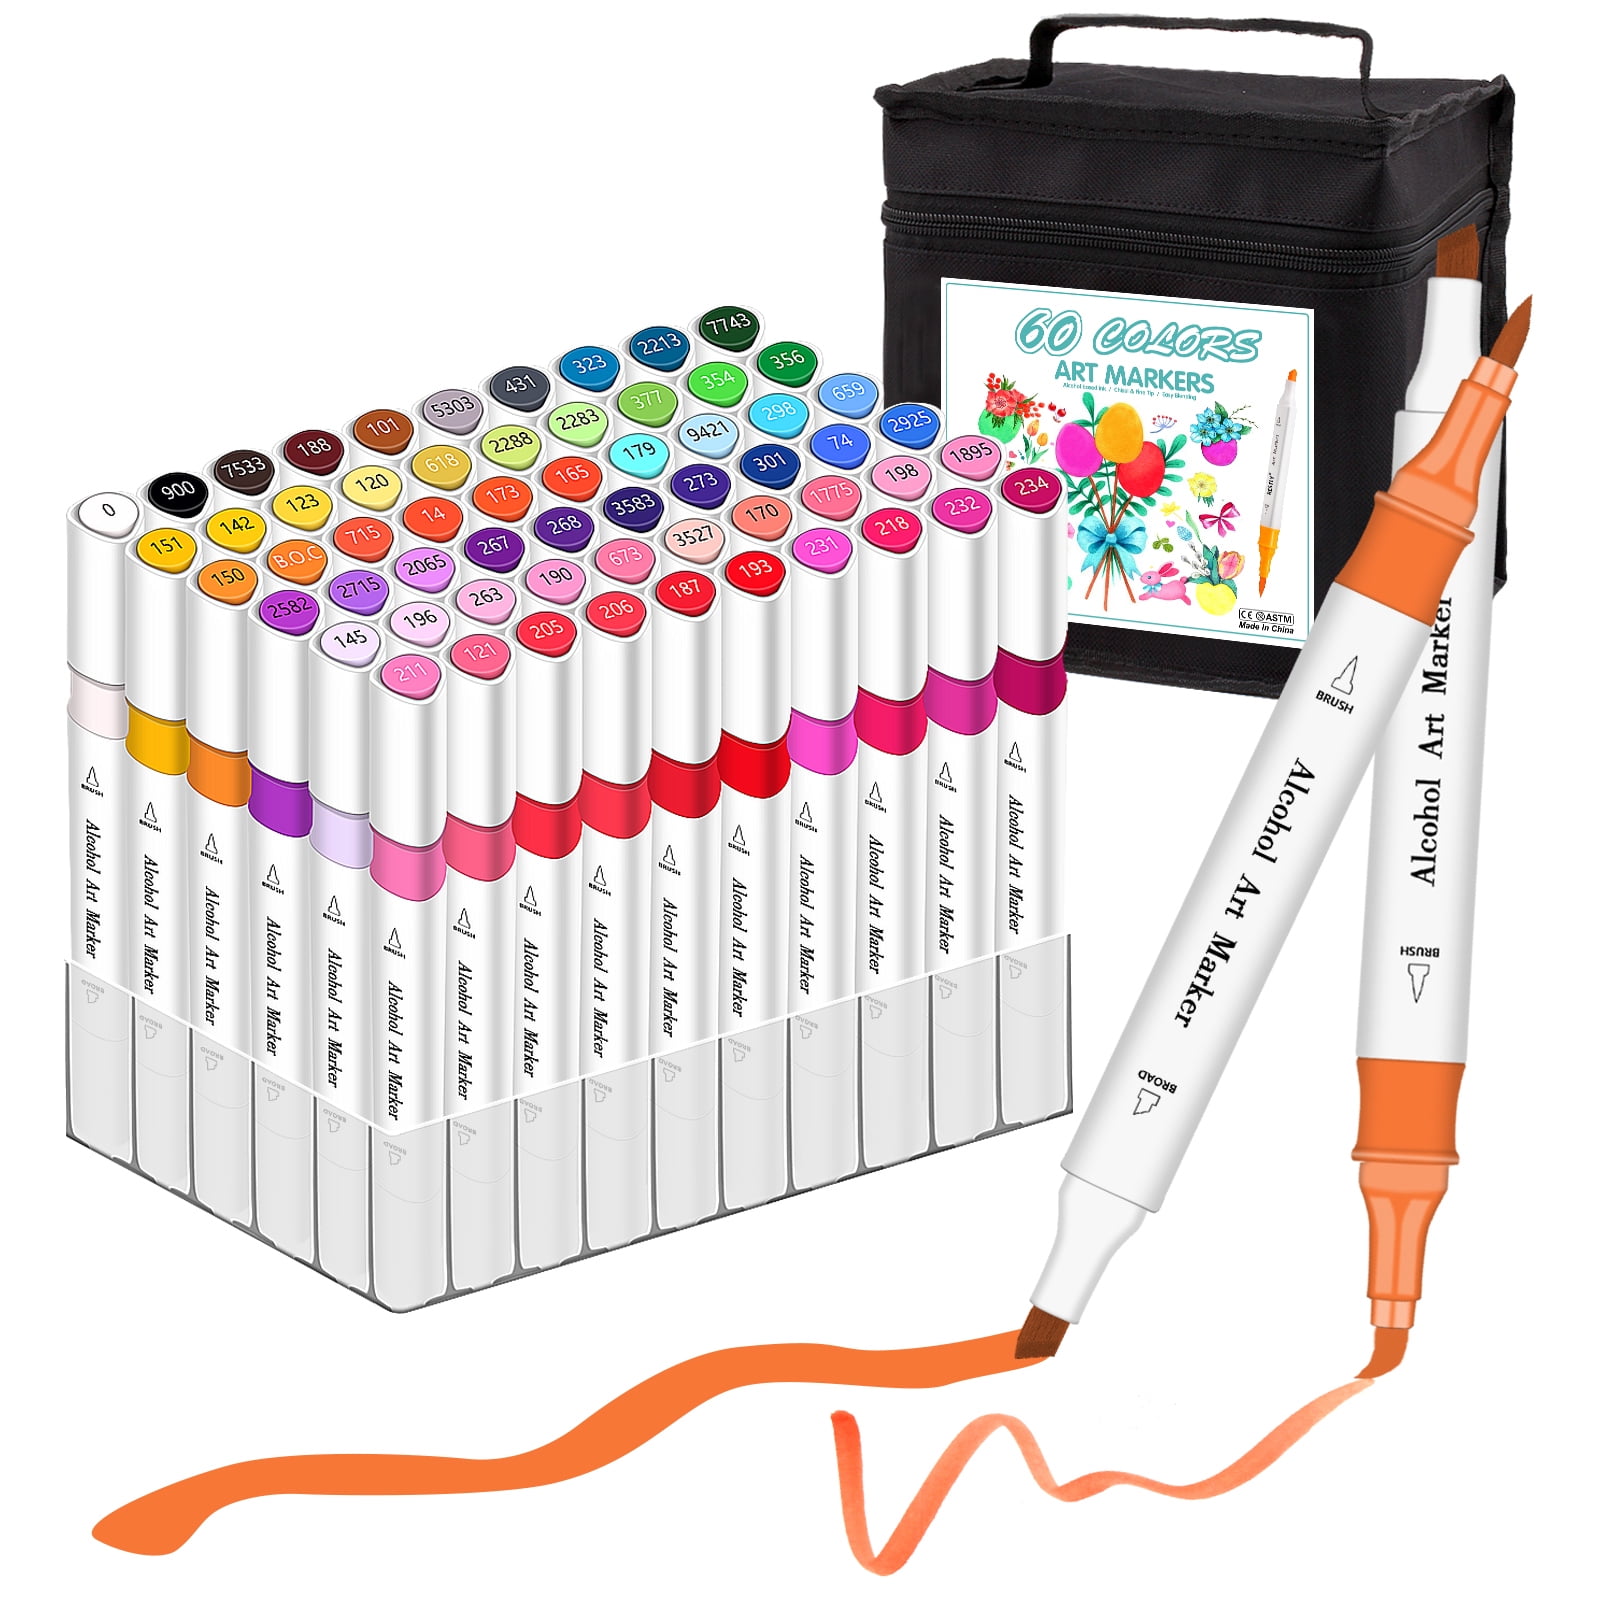 WELLOKB Alcohol Markers Set, 60 Dual Tip Permanent Art Markers for  Coloring, Illustrations, Sketching, Ideal for Kids and Adults, Includes  Brush Tip, Washable and Colored Markers 